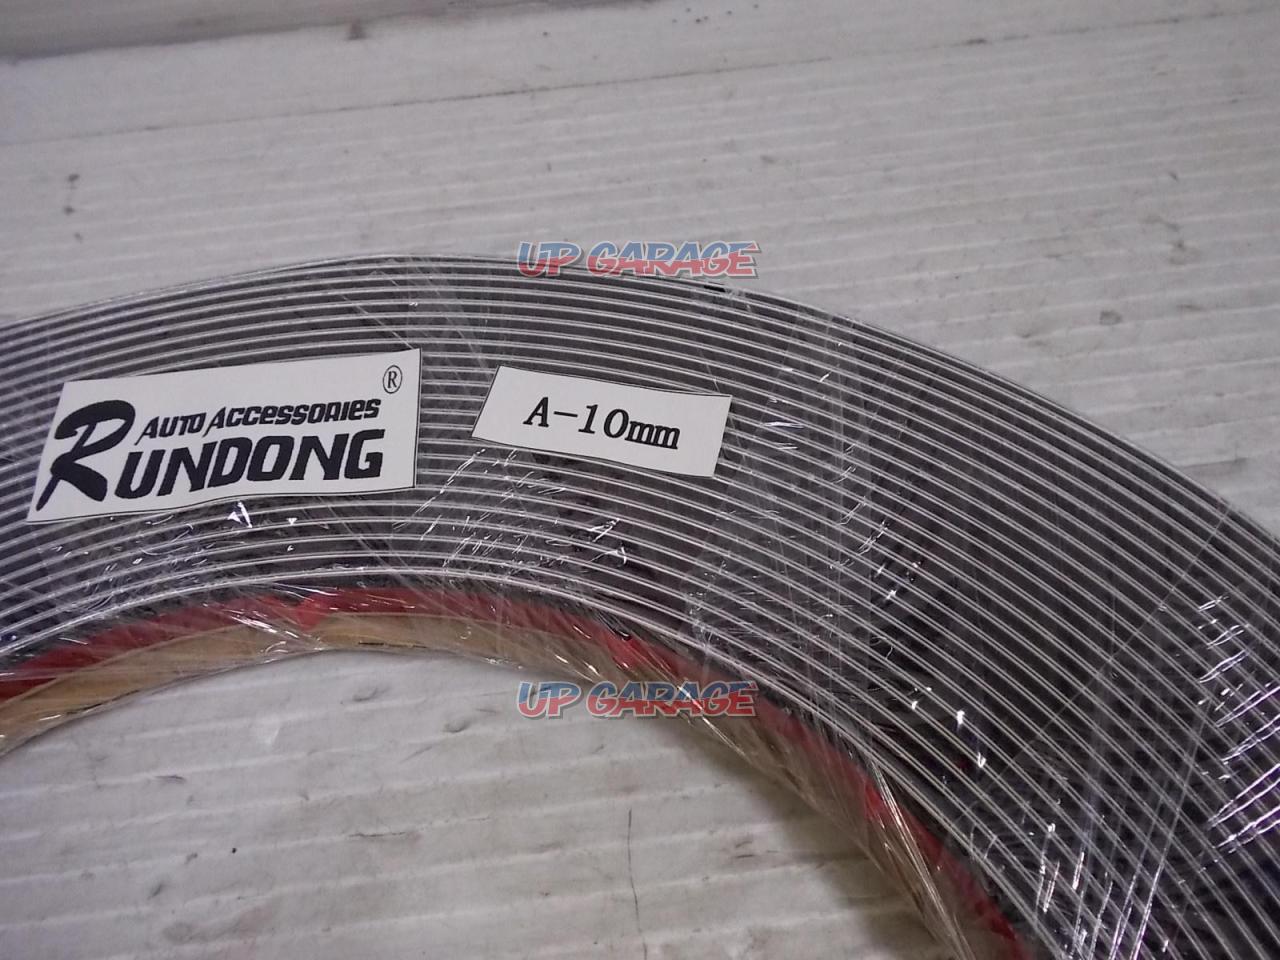 RUNDONG AUTO ACCESSORIES Plating Mall, Body Parts Accessories